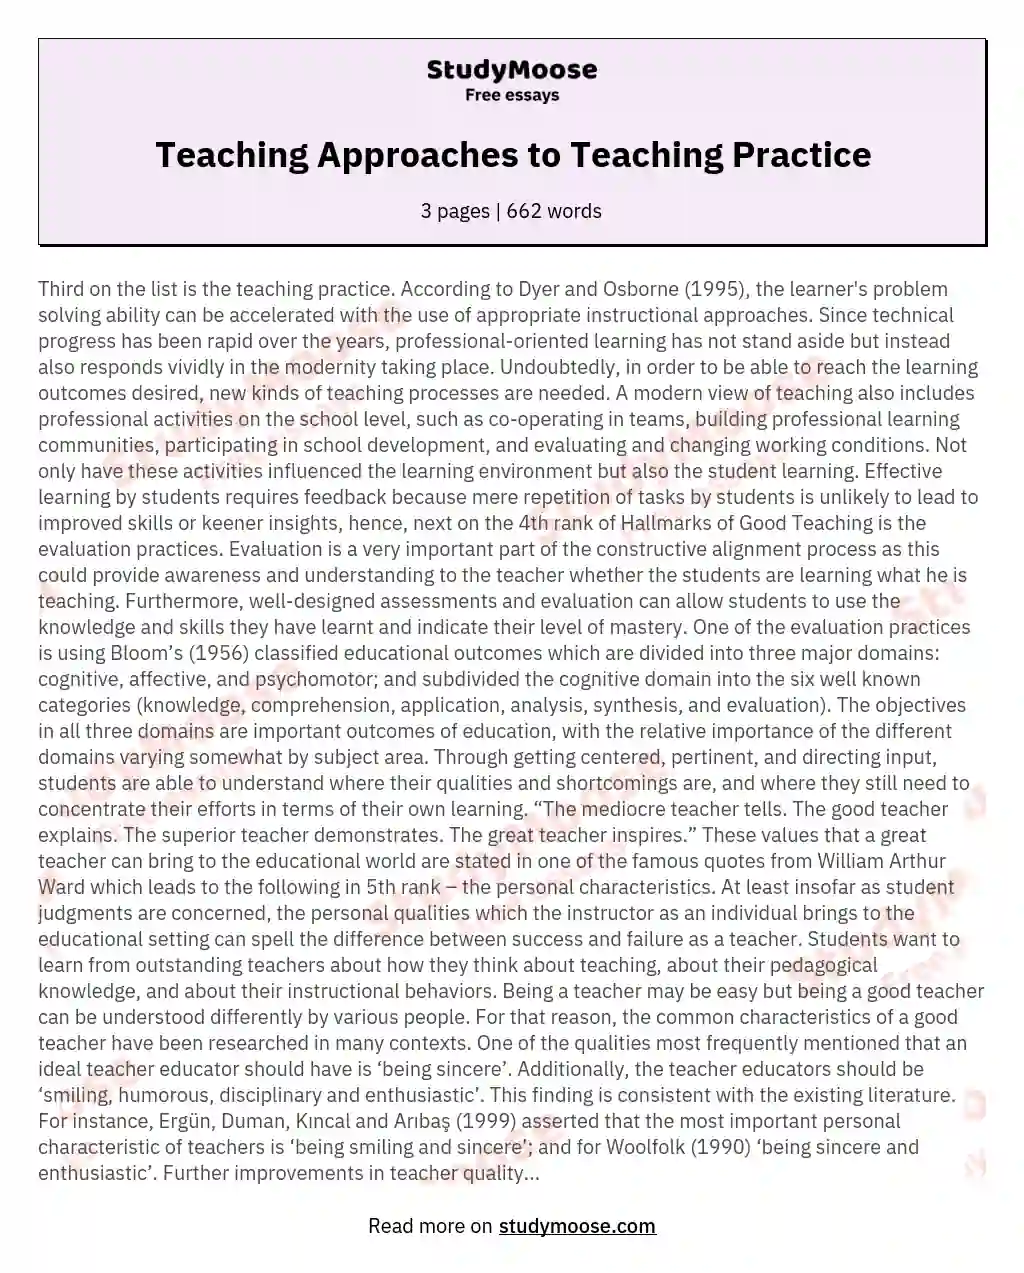 Teaching Approaches to Teaching Practice essay